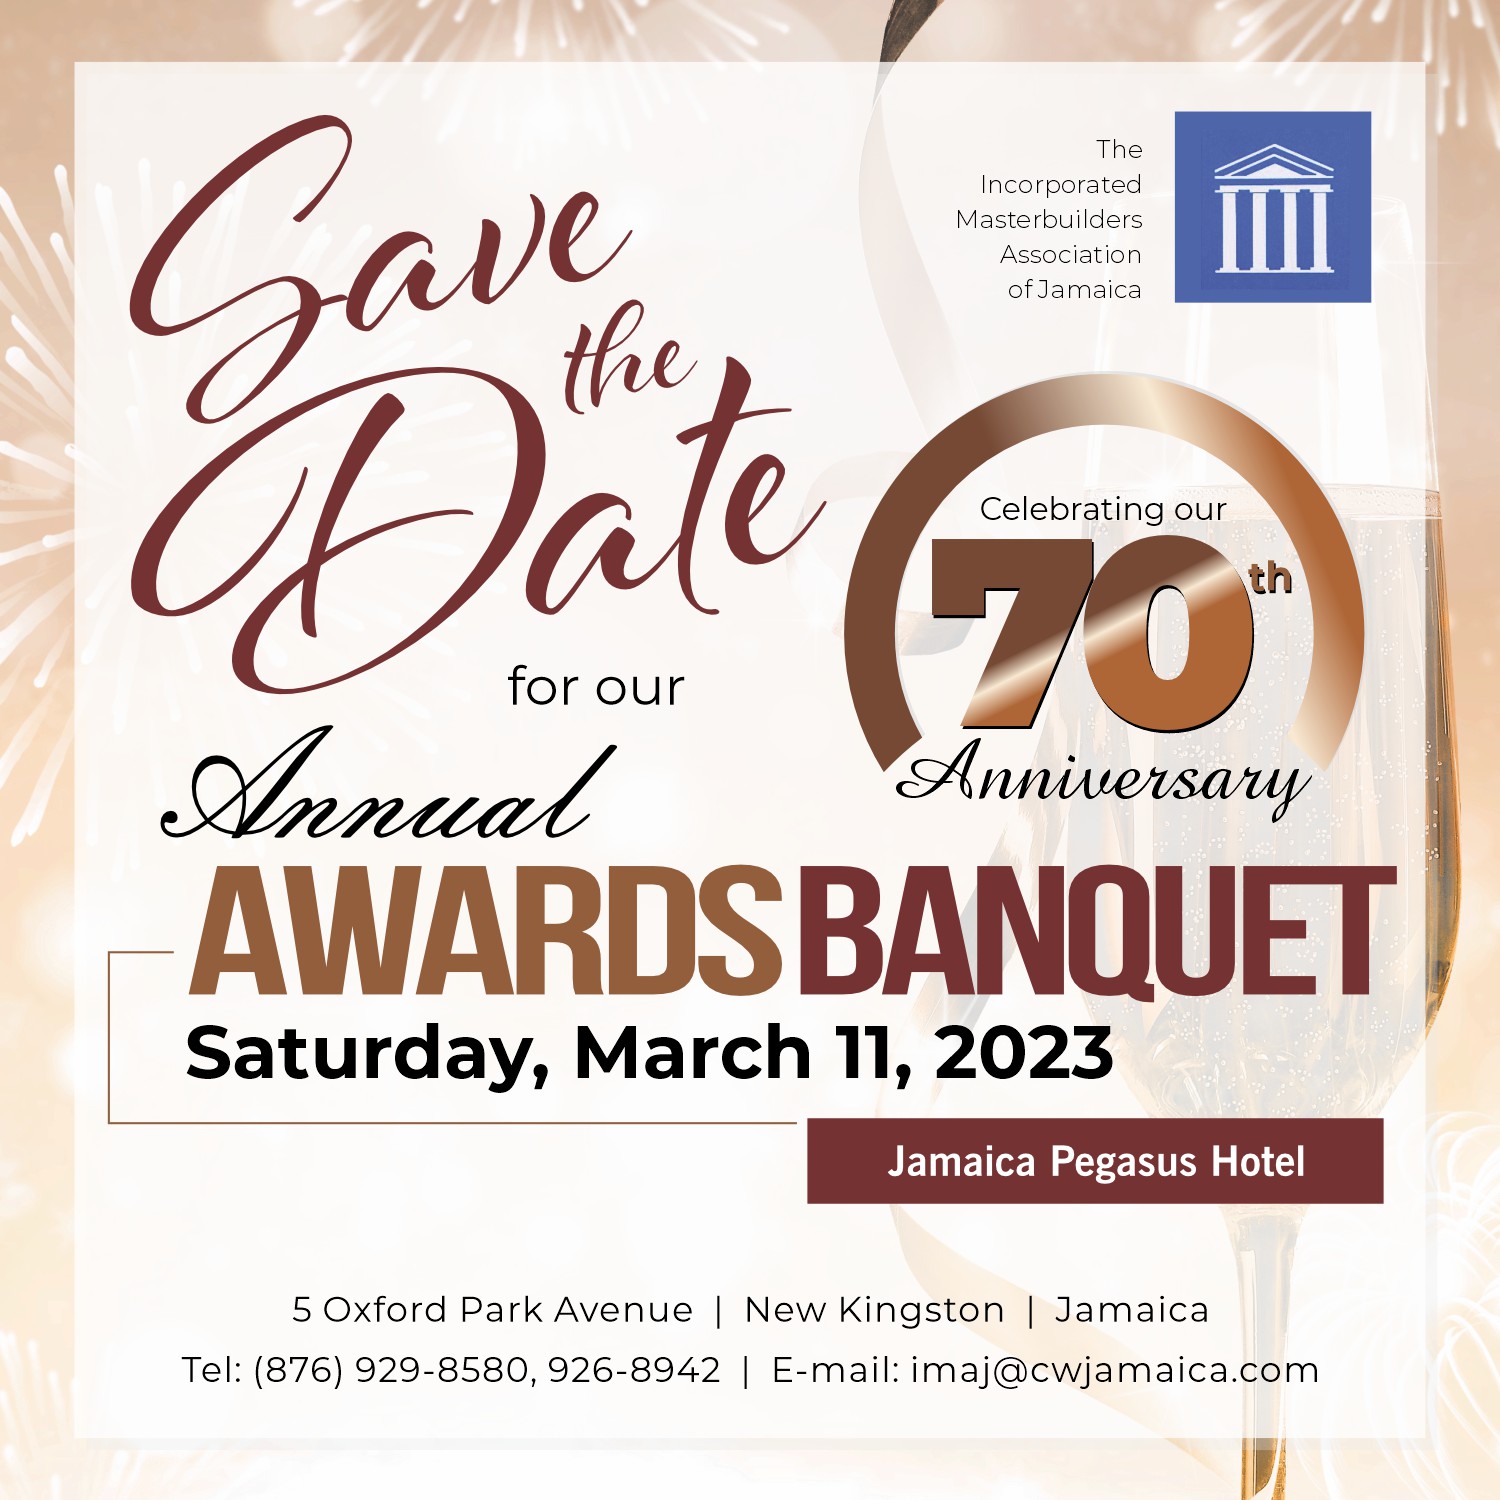 Save the Date! 70th Annual IMAJ Awards Banquet